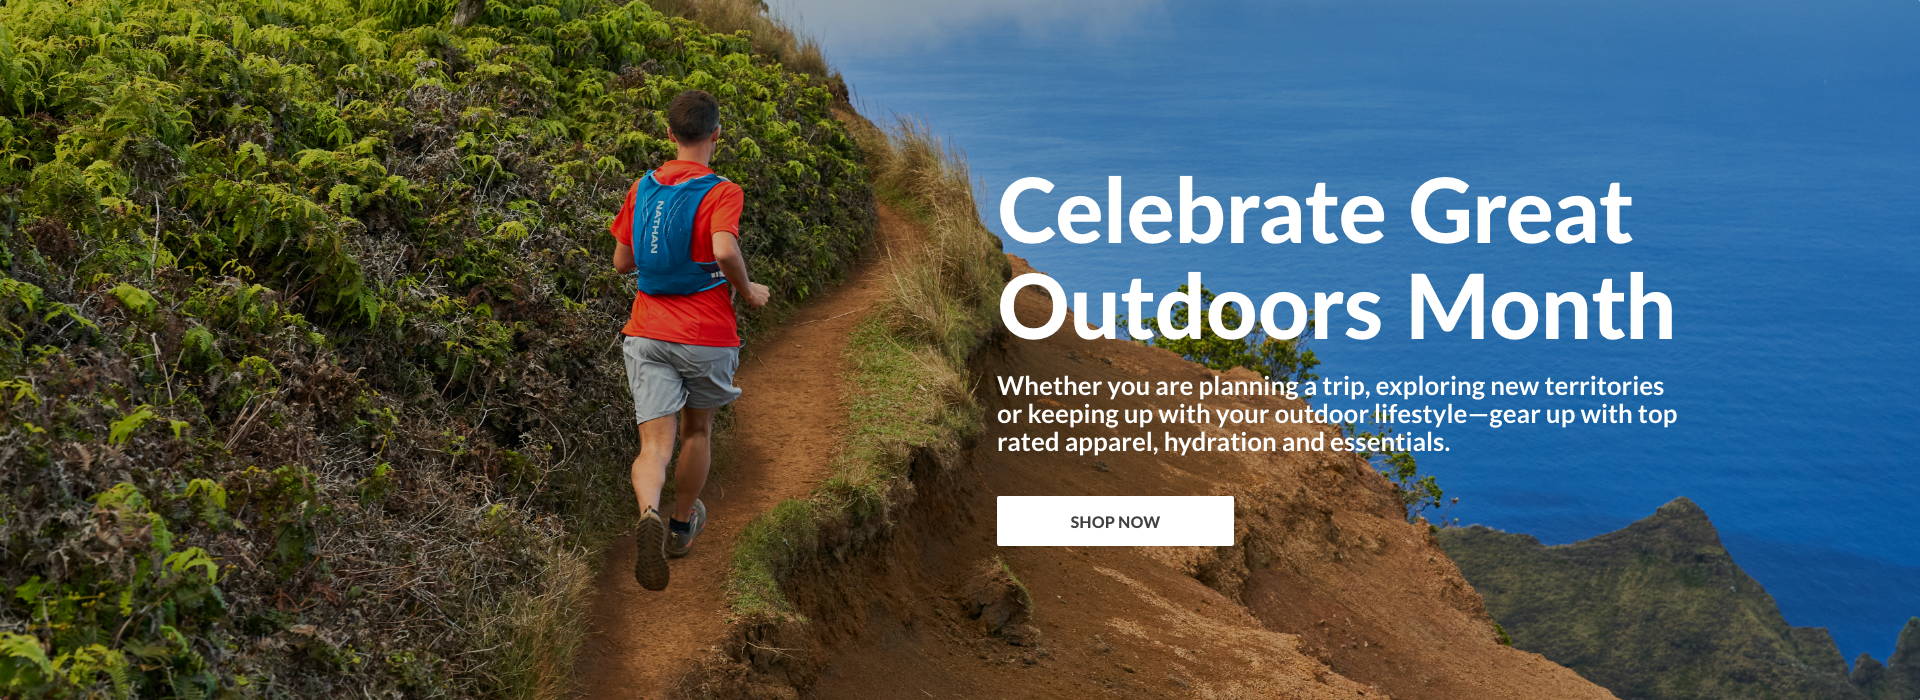 Celebrate Great Outdoors Month